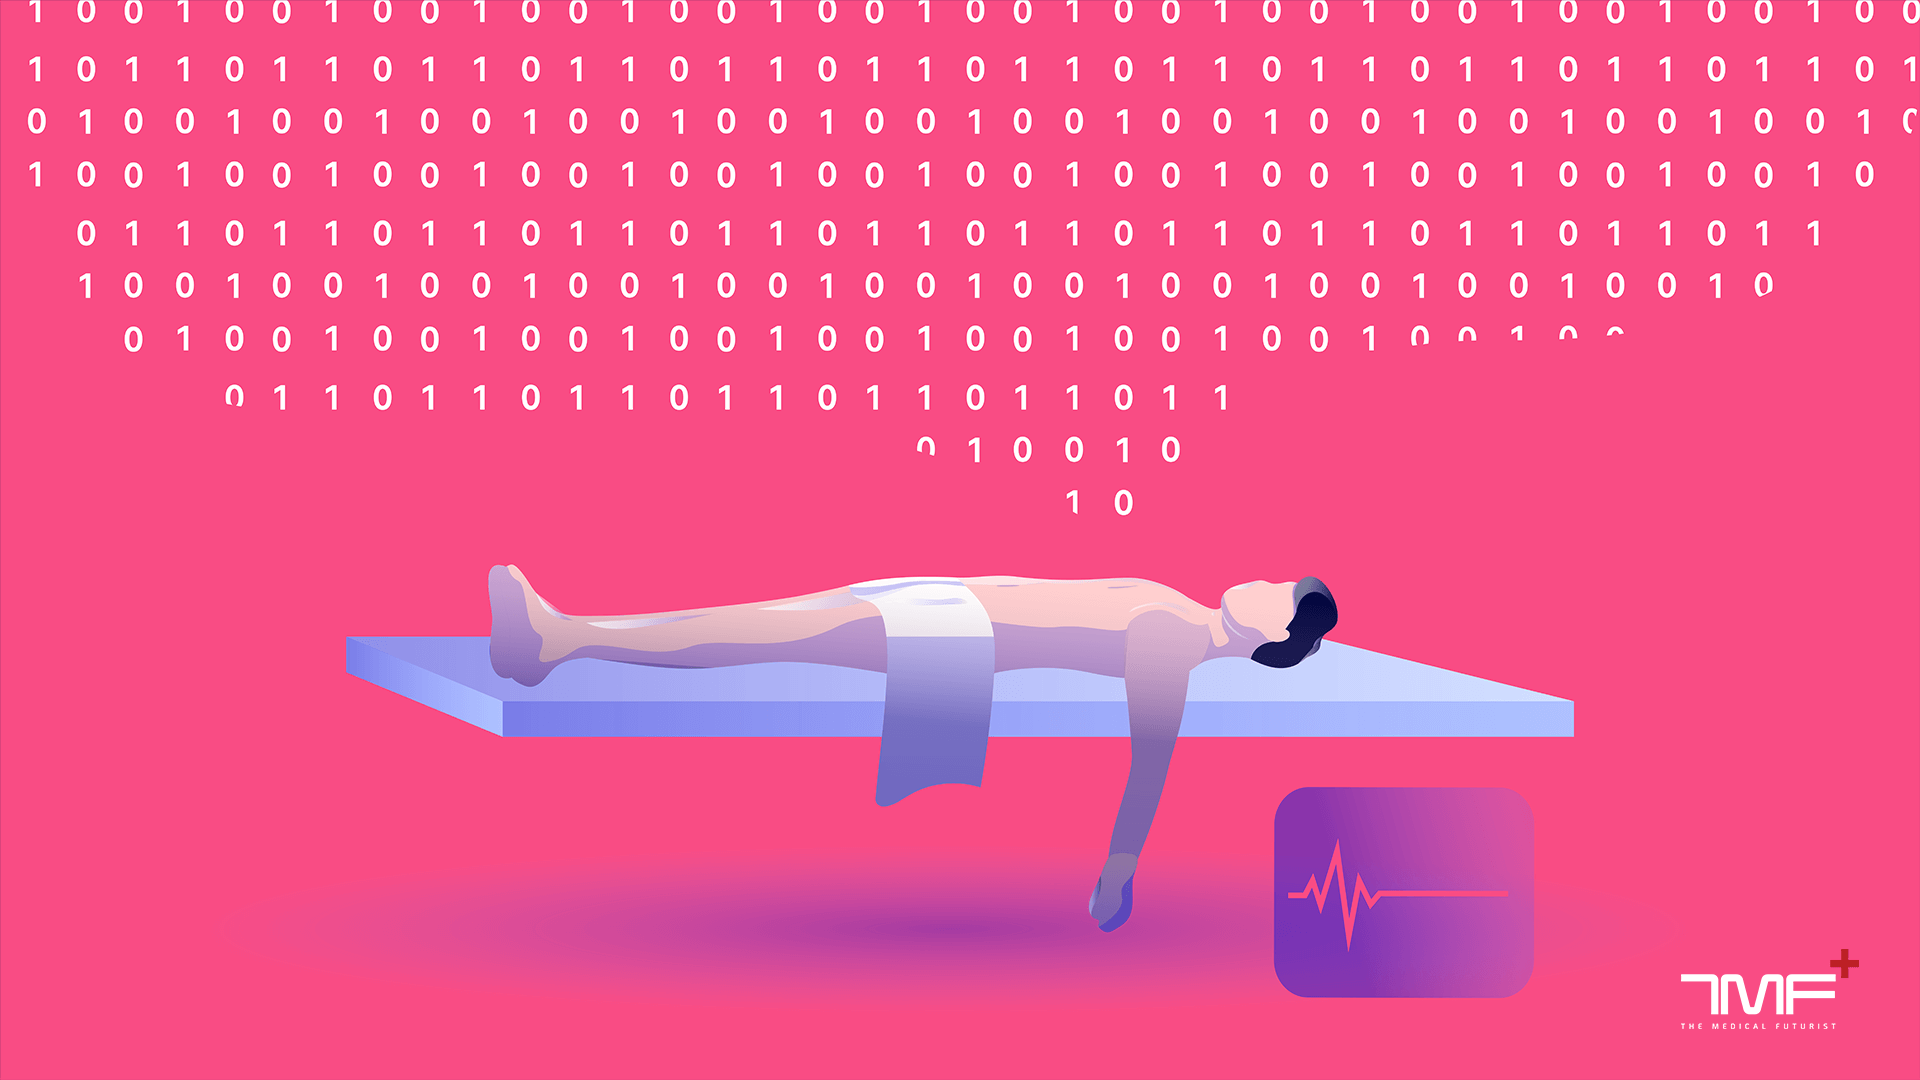 What Happens To Your Medical Data After You Die?